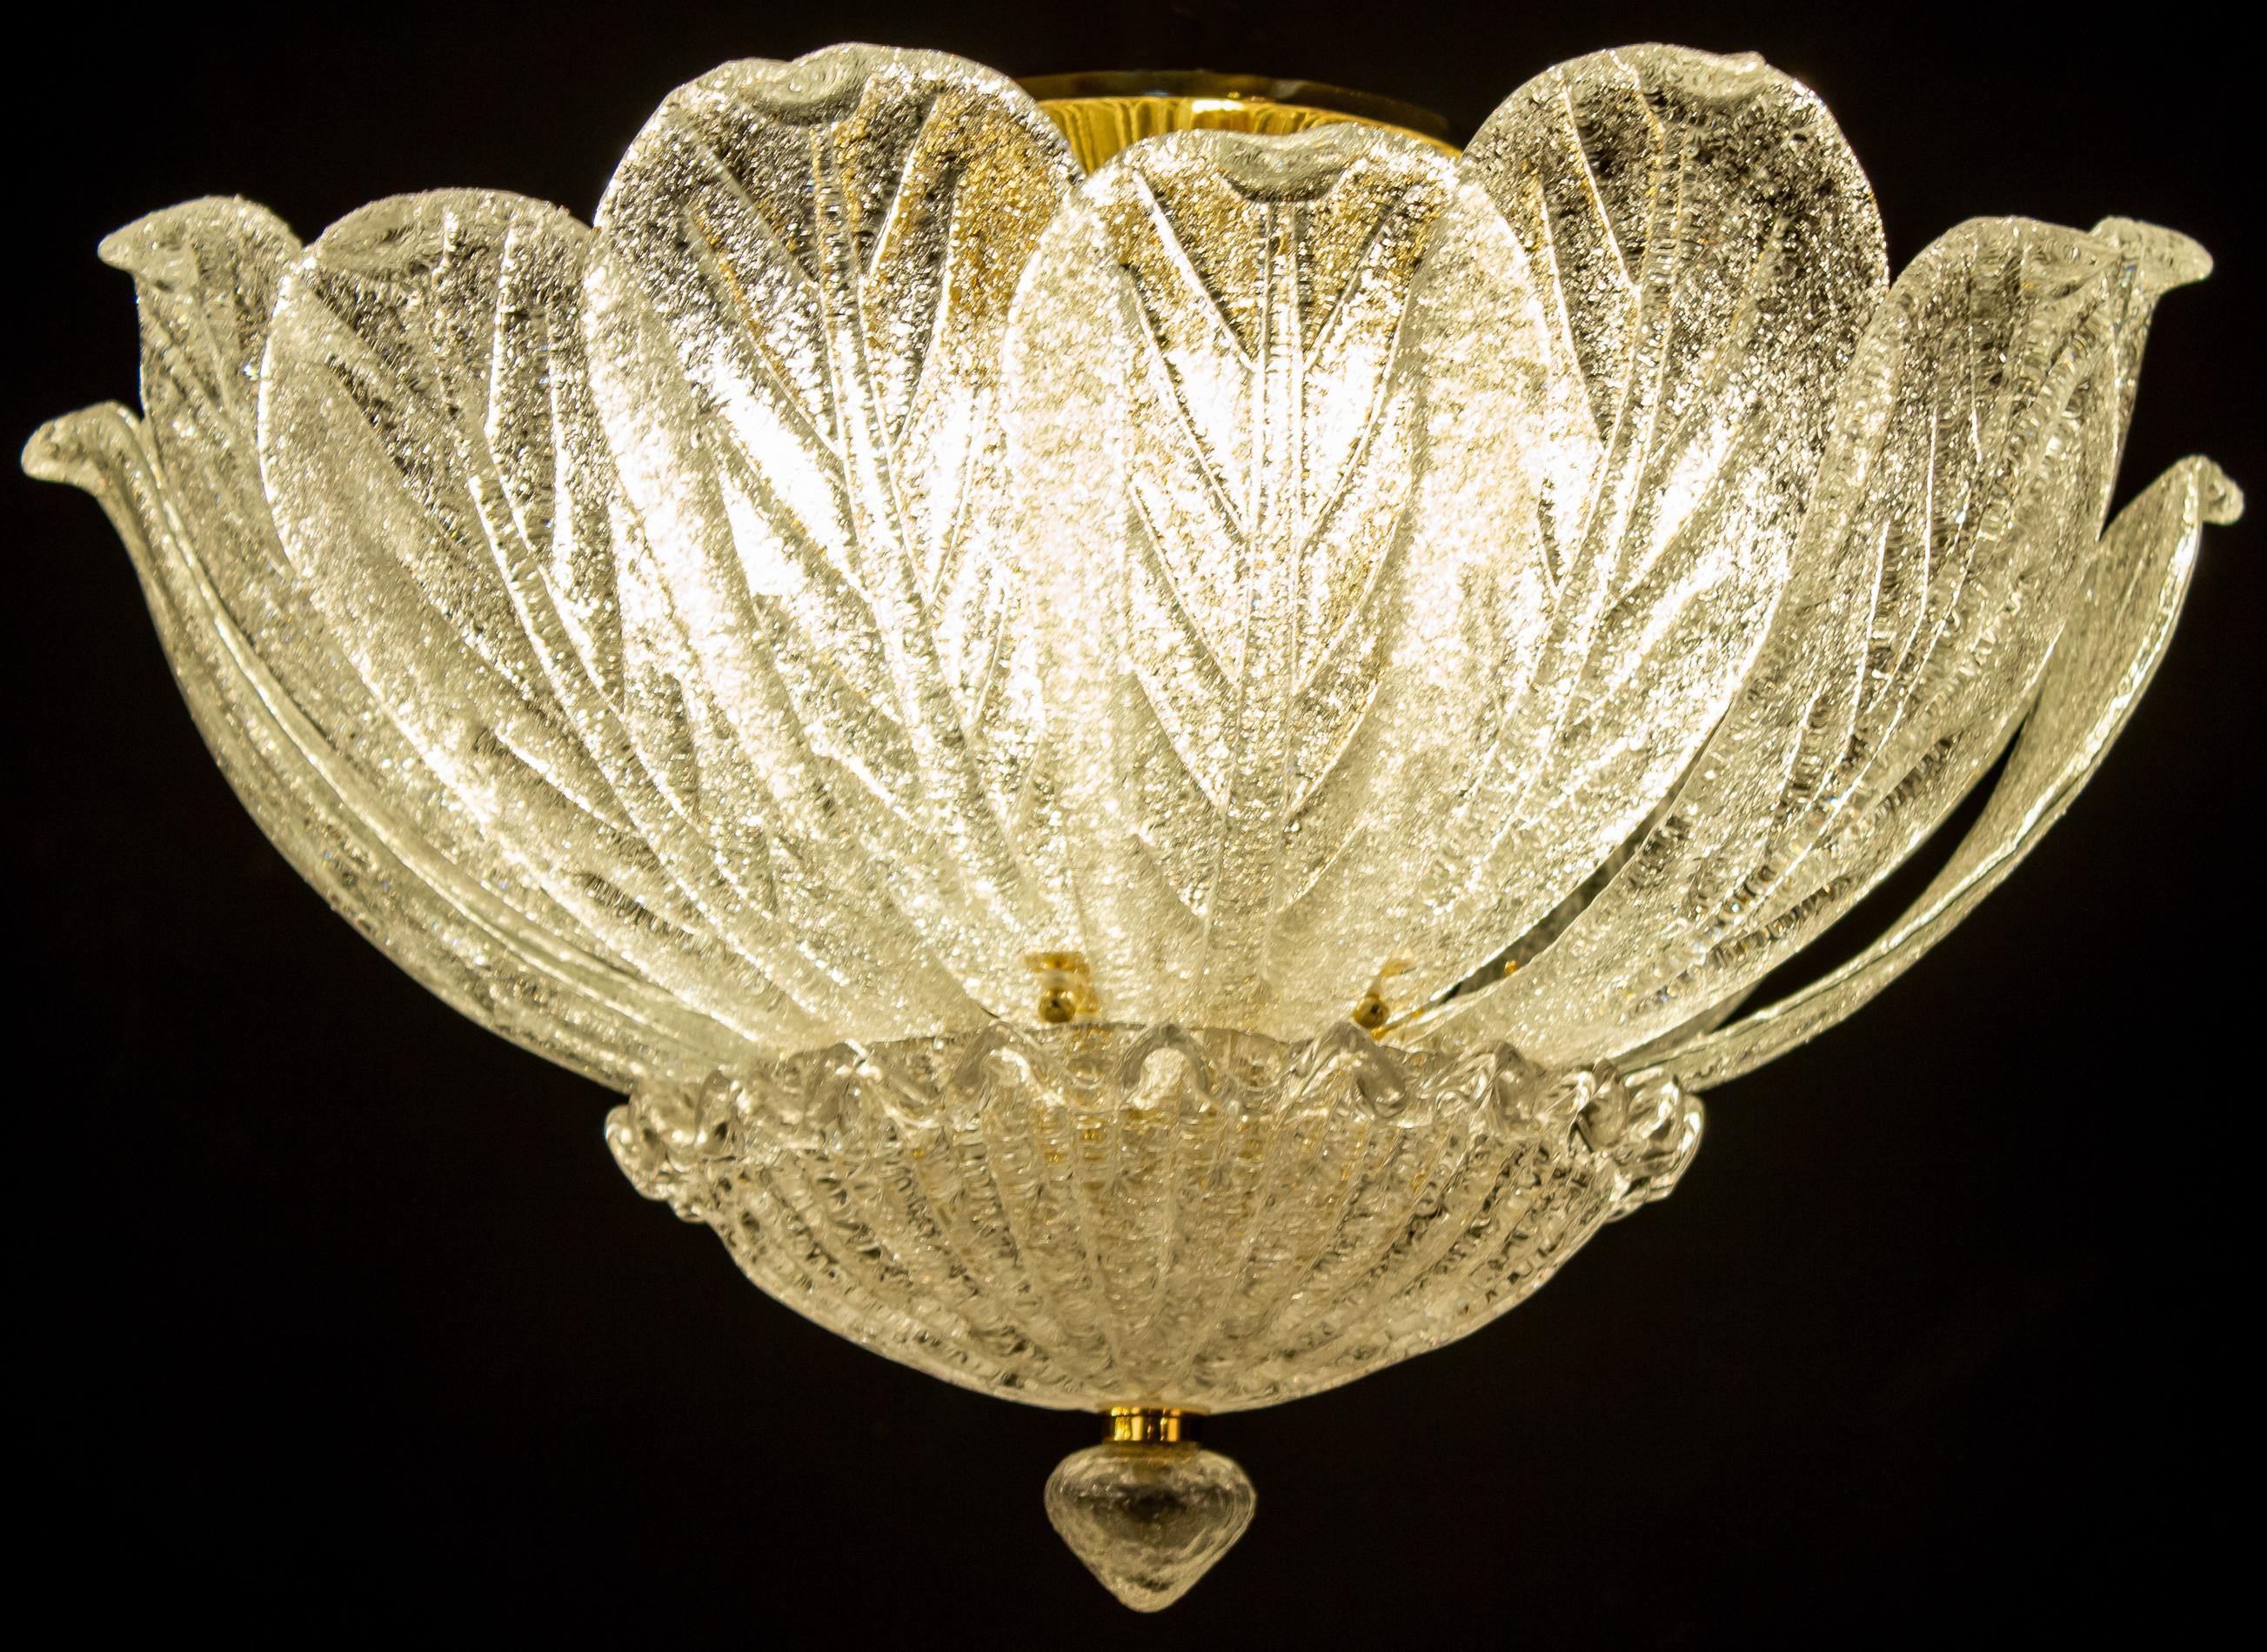 Realized in pure Murano glass leaves. The structure is gilt-metal. Five E 14 lights spread a magical light.
Available 6 of this Item.
Measures: Diameter 60 cm, height 35 cm without the chain.